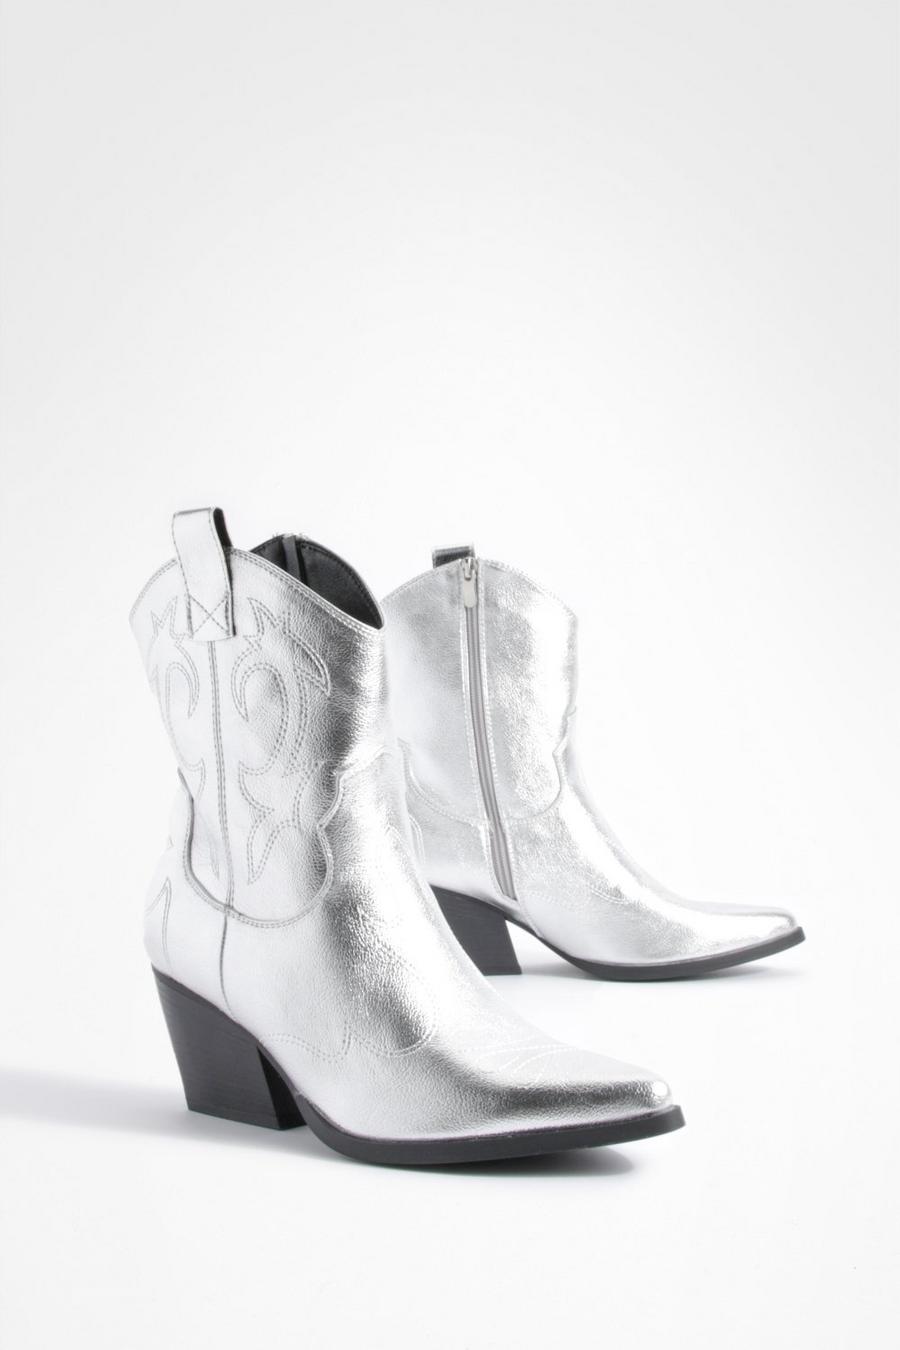 Silver Stitch Detail Ankle Western Cowboy Boots